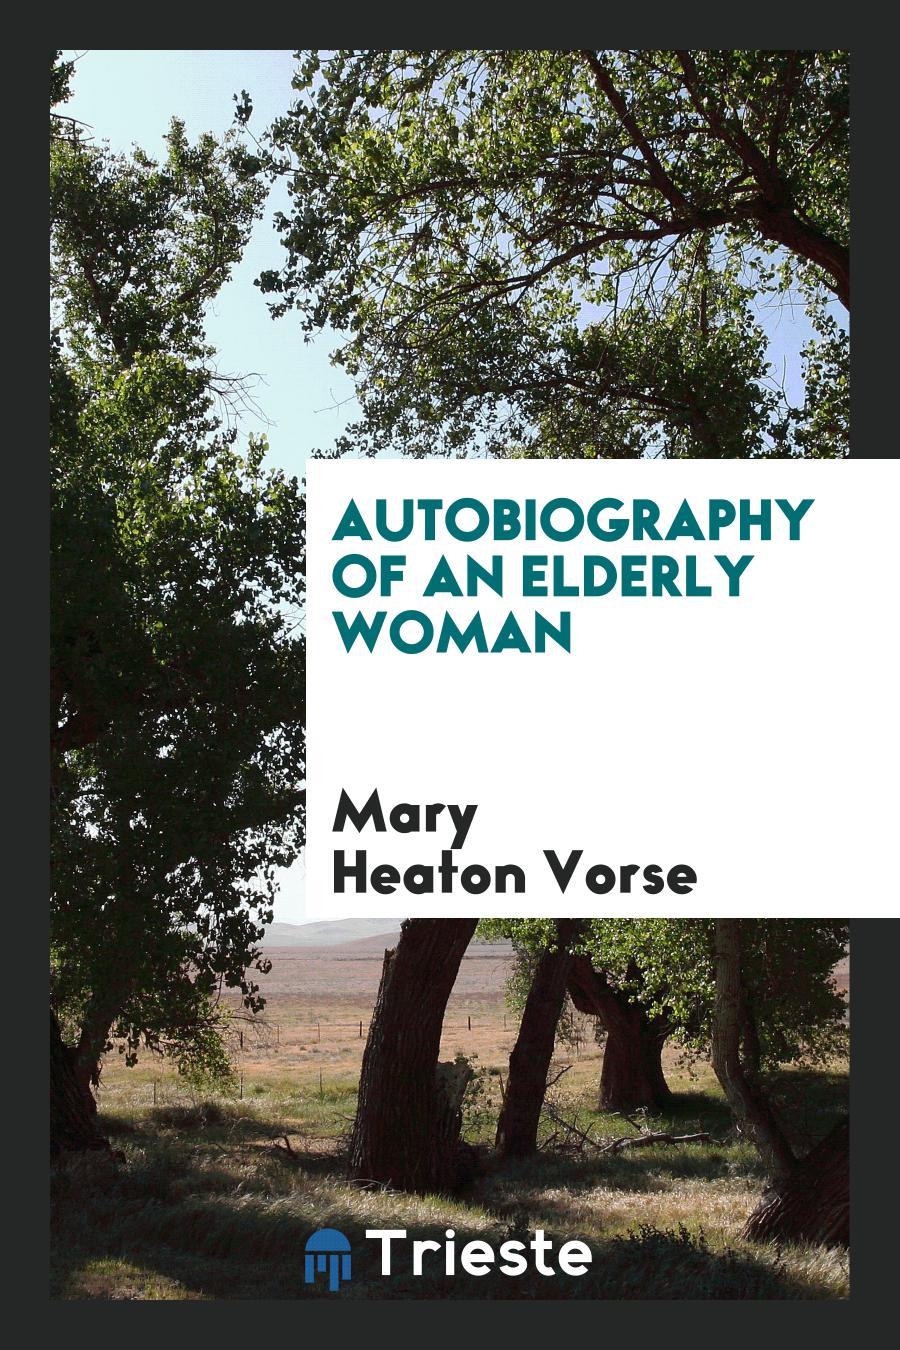 Autobiography of an Elderly Woman